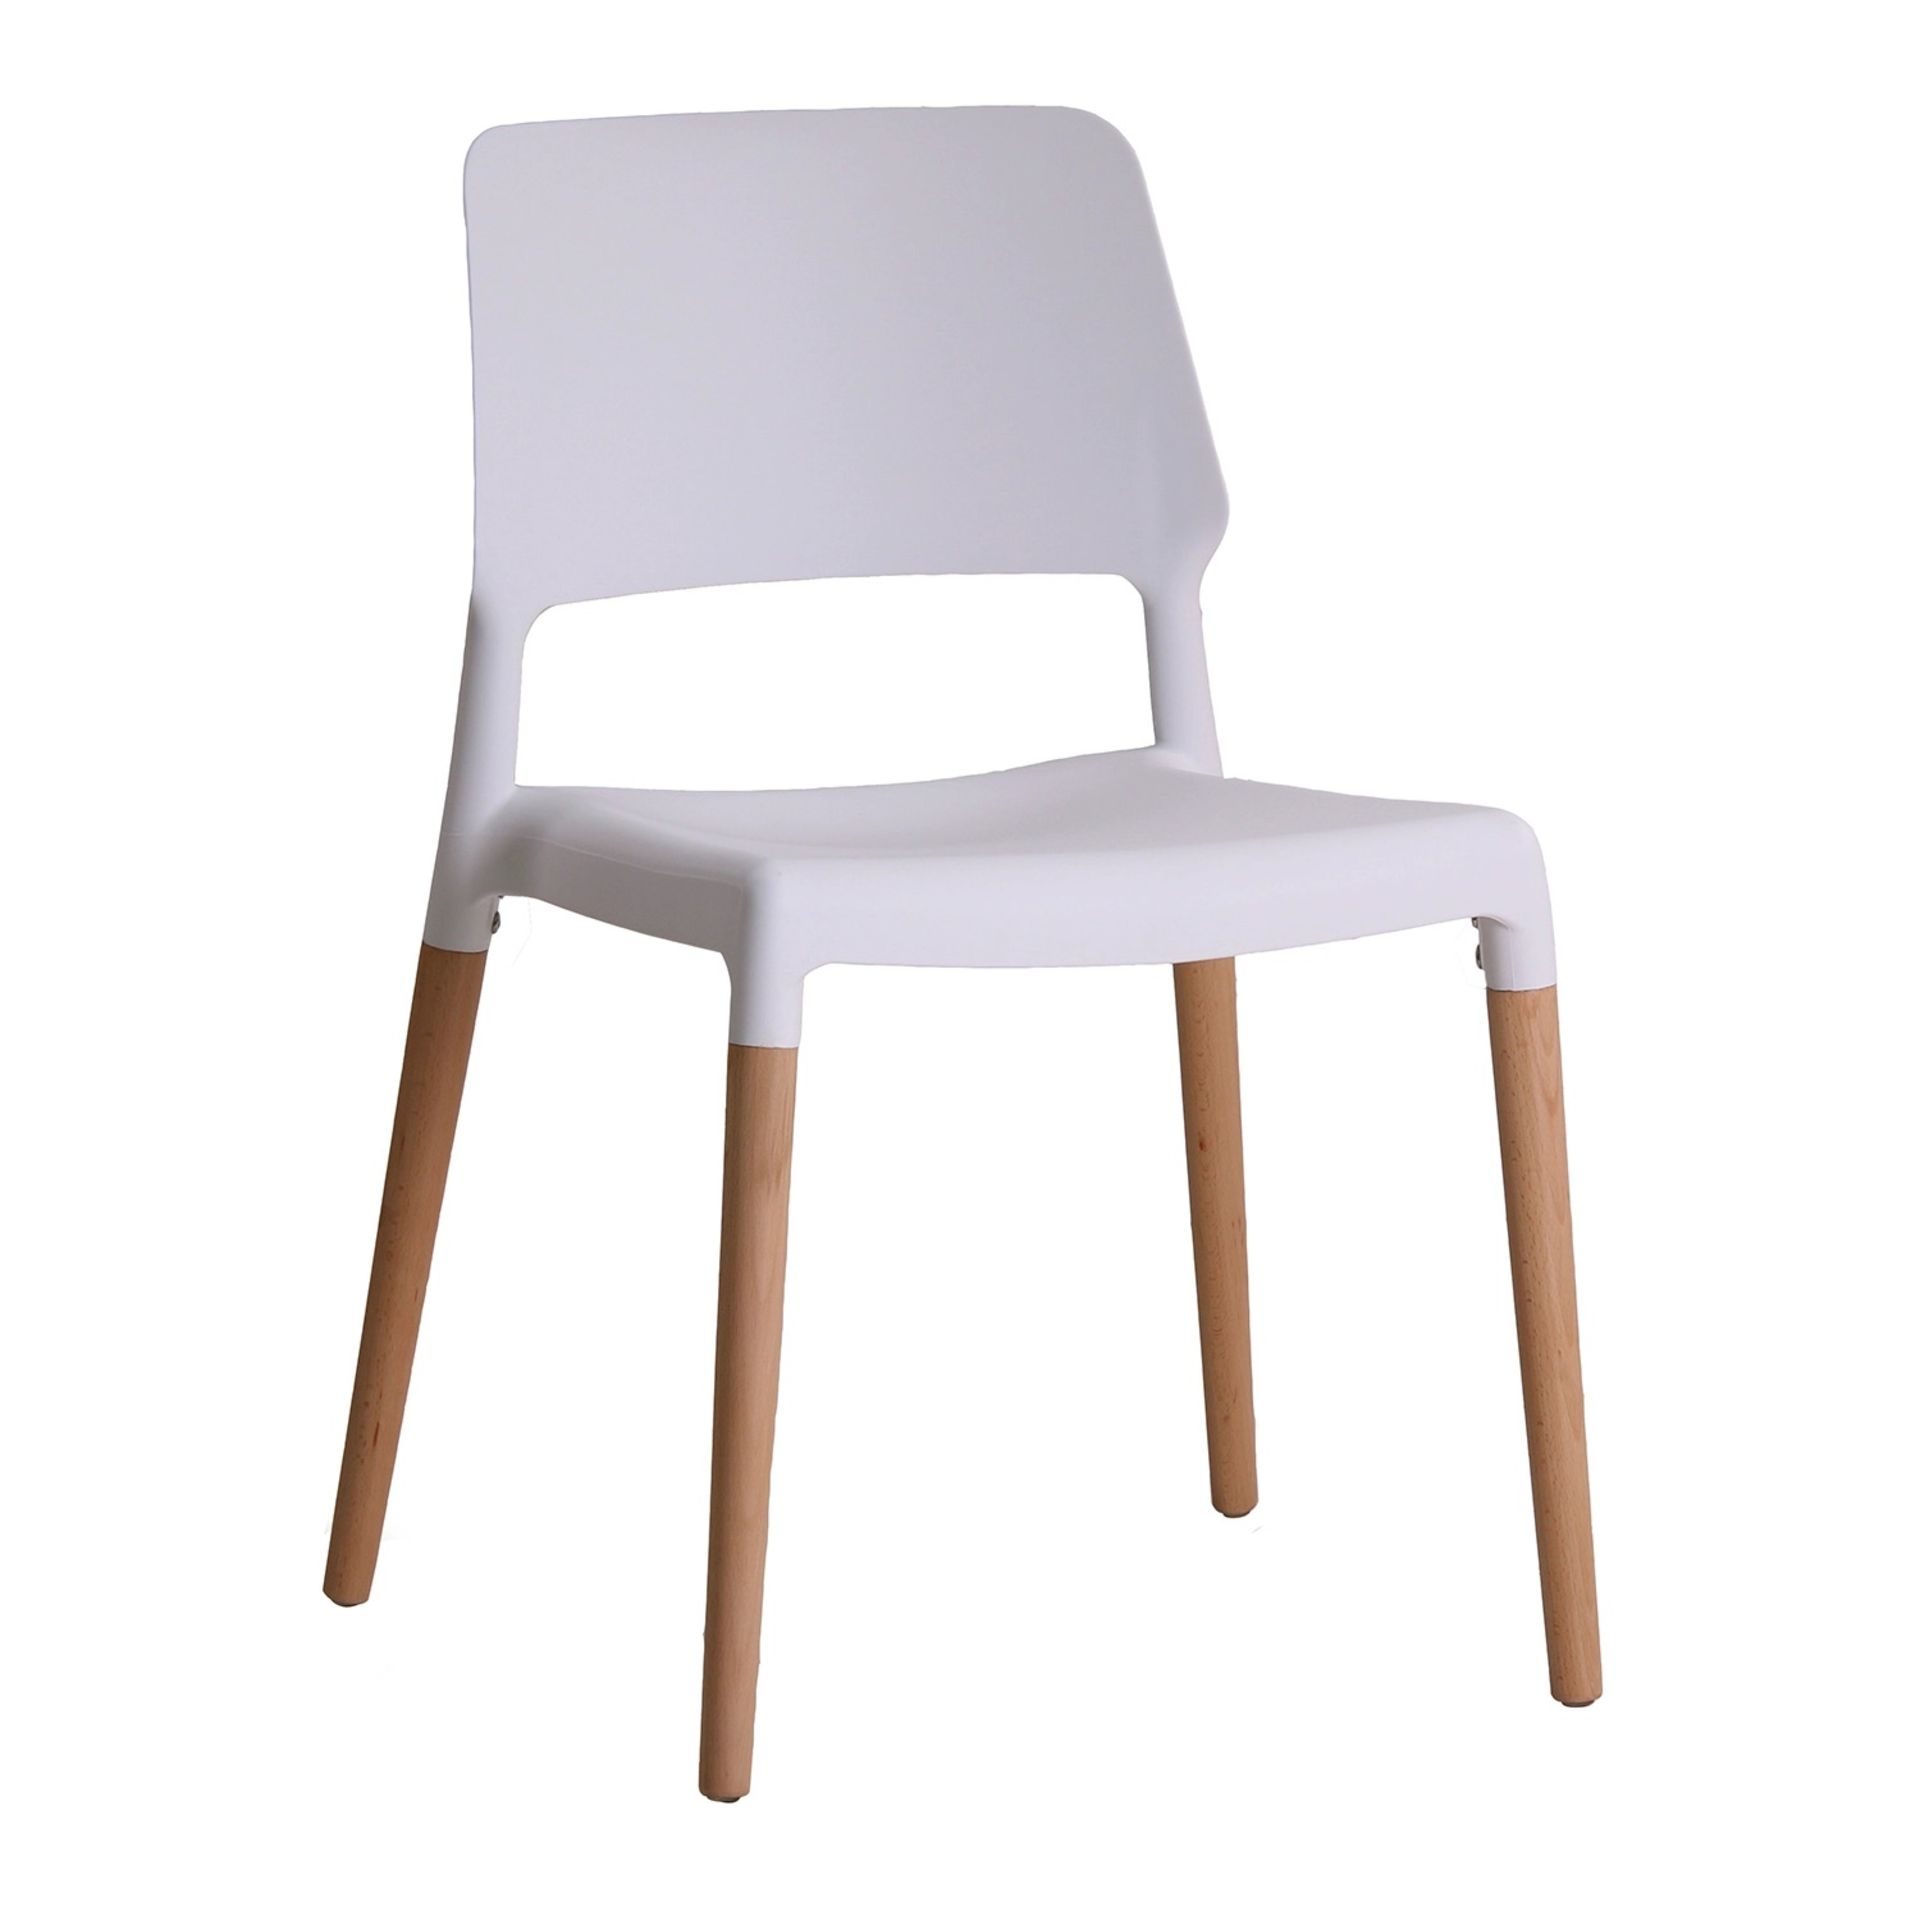 RIVA PAIR OF DINING CHAIRS IN WHITE DURABLE PLASTIC - RRP £159 PER PAIR - Image 3 of 3